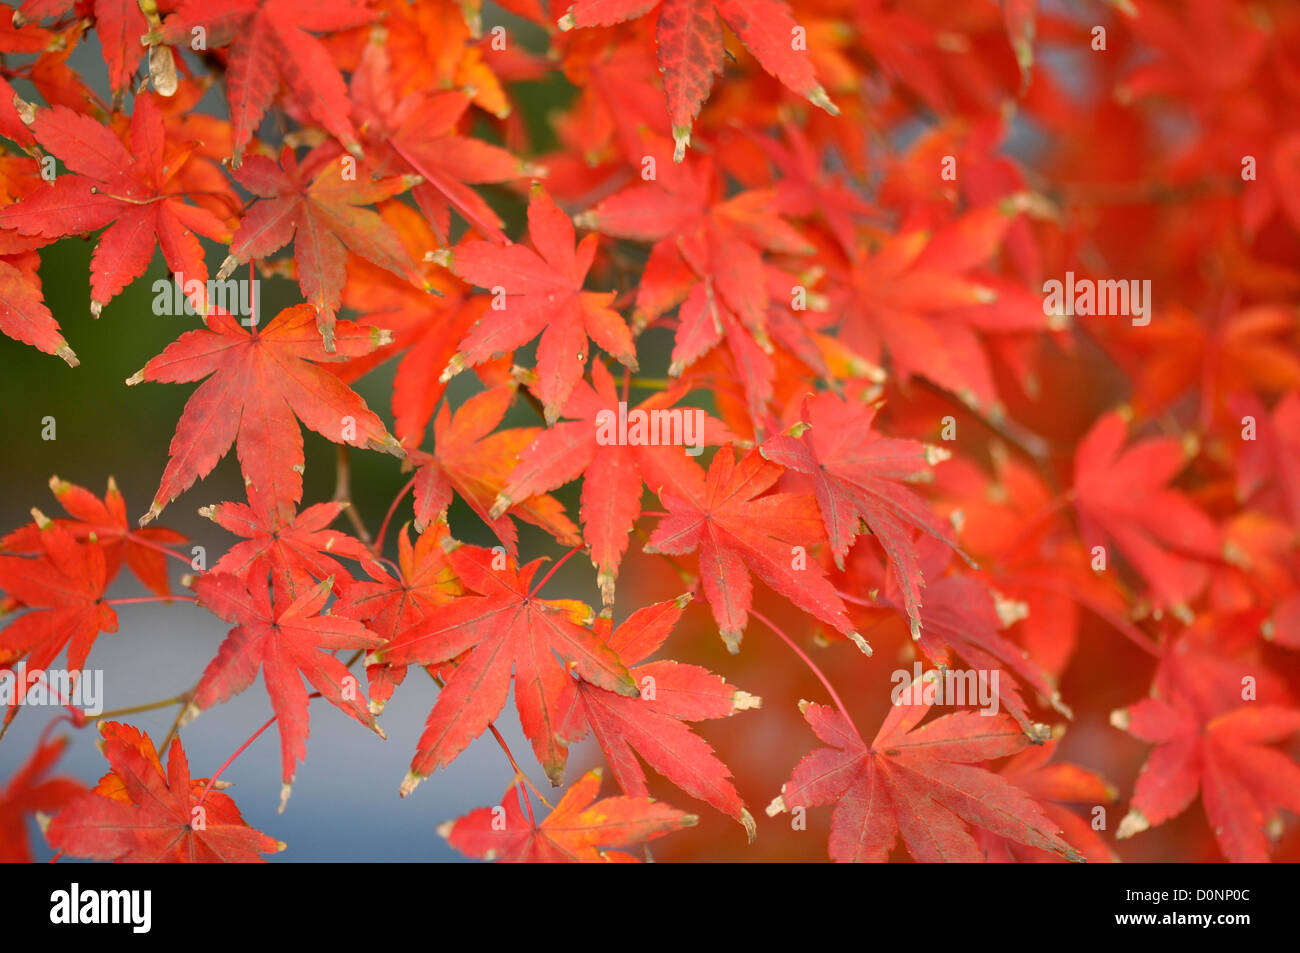 Maple leaves in red autumn color, close-up, Nagano, Japan Stock Photo